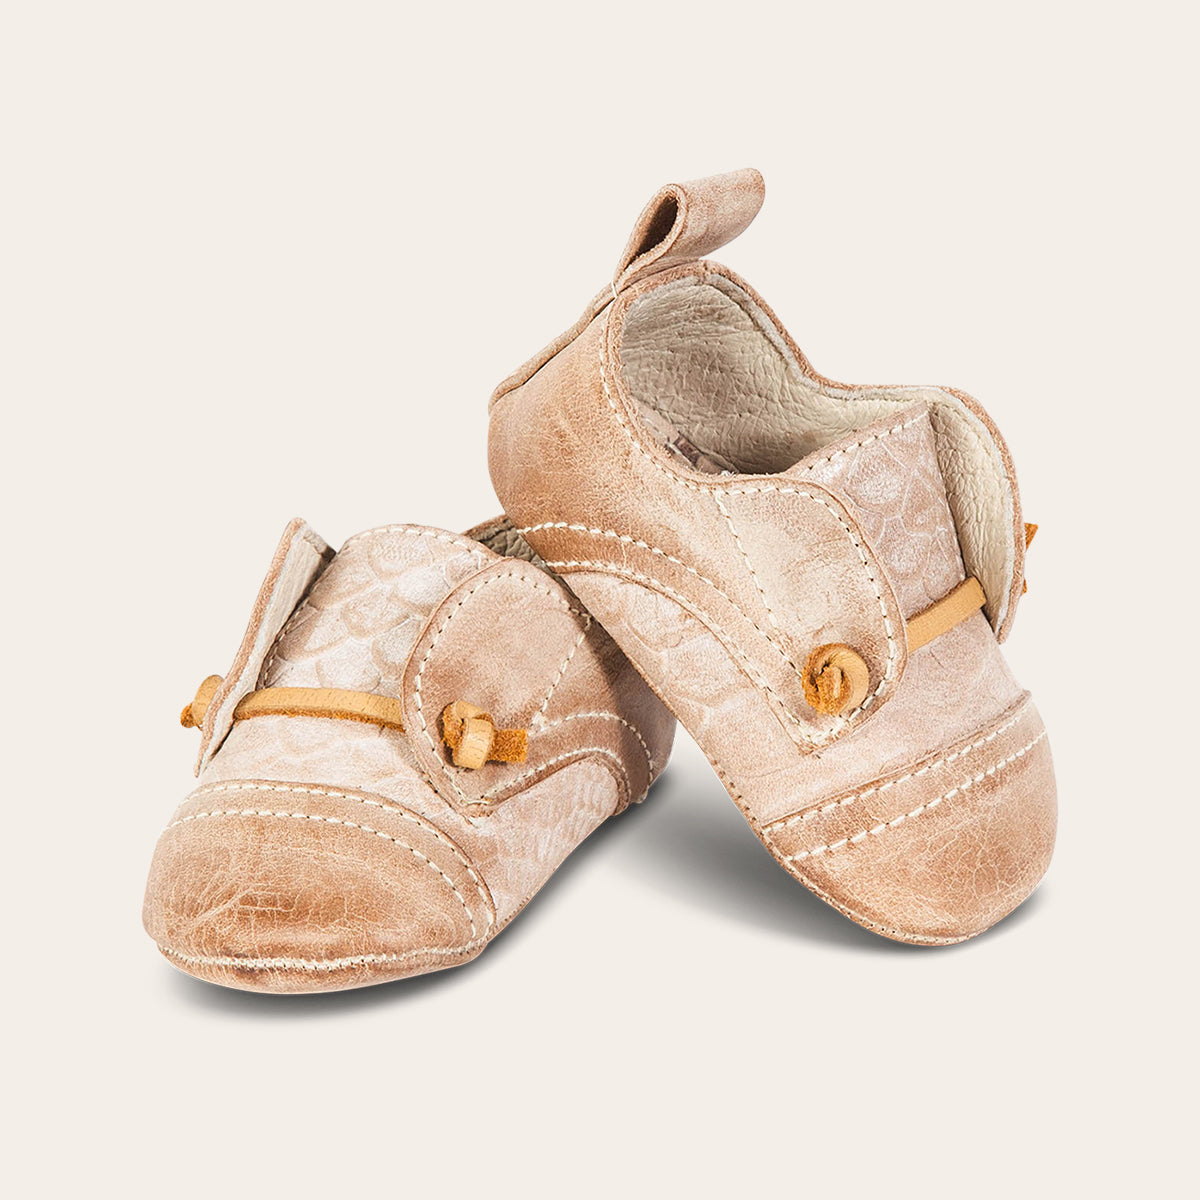 front view showing contrasting decorative knotted leather lace on FREEBIRD infant baby mabel taupe leather shoe